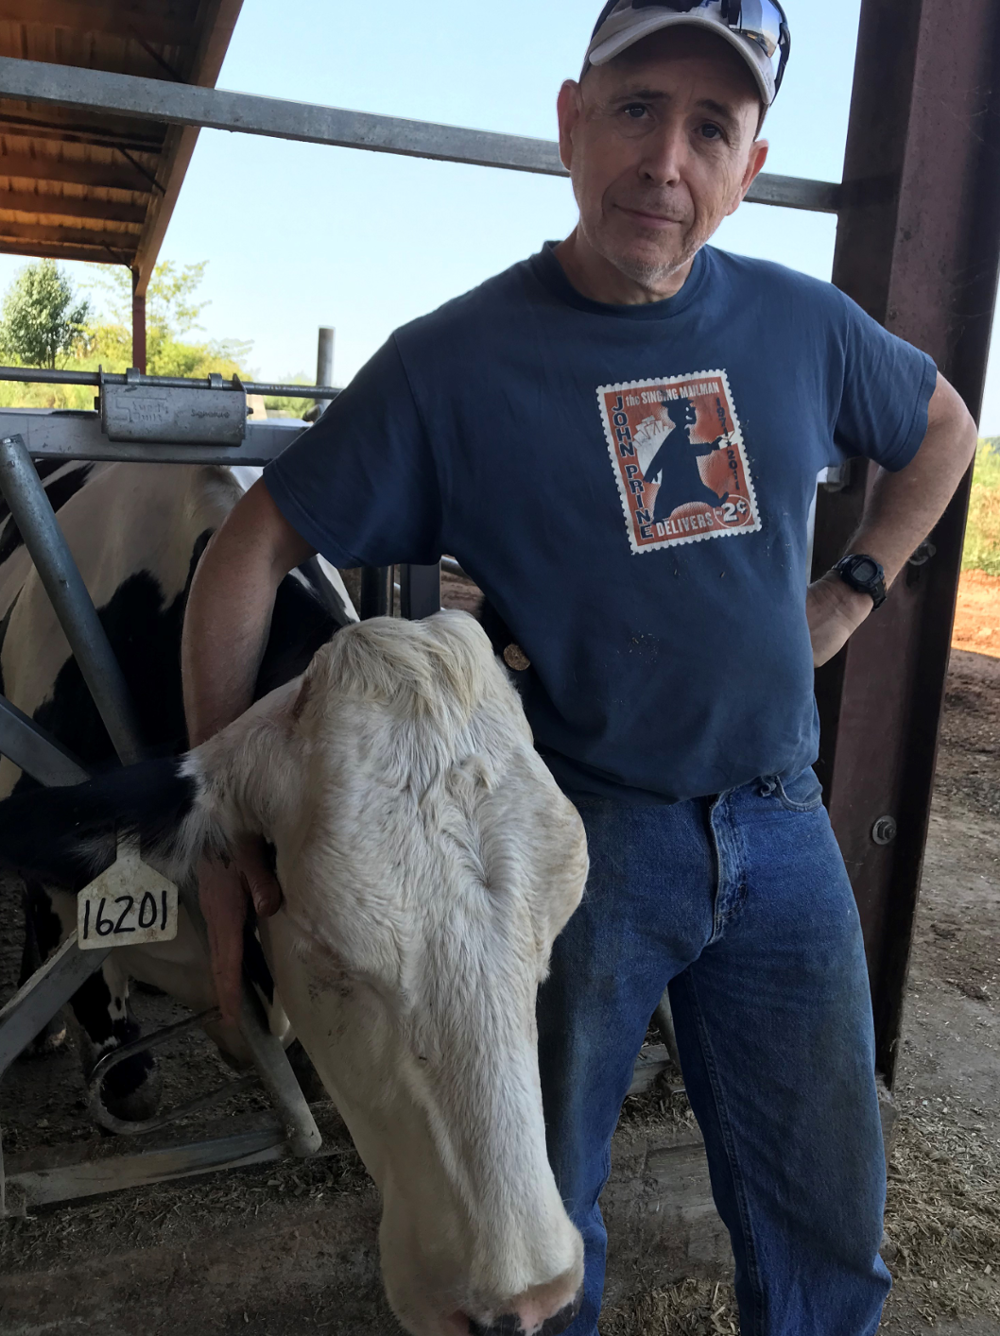 Transplant surgeon Dr. Marty Sellers shows his fun side posing with a cow.